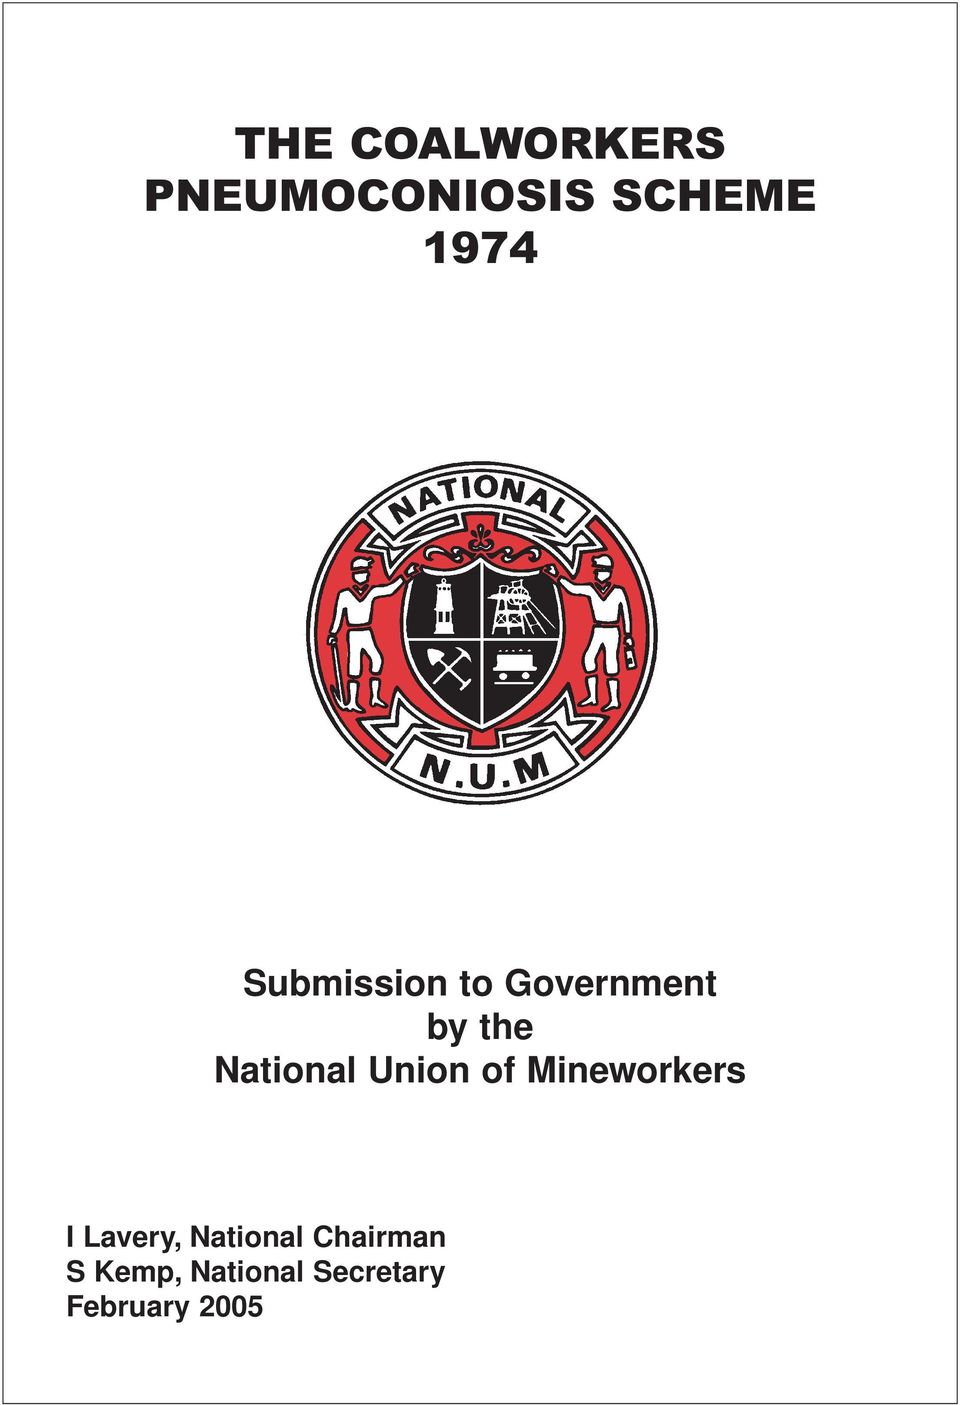 Union of Mineworkers I Lavery, National